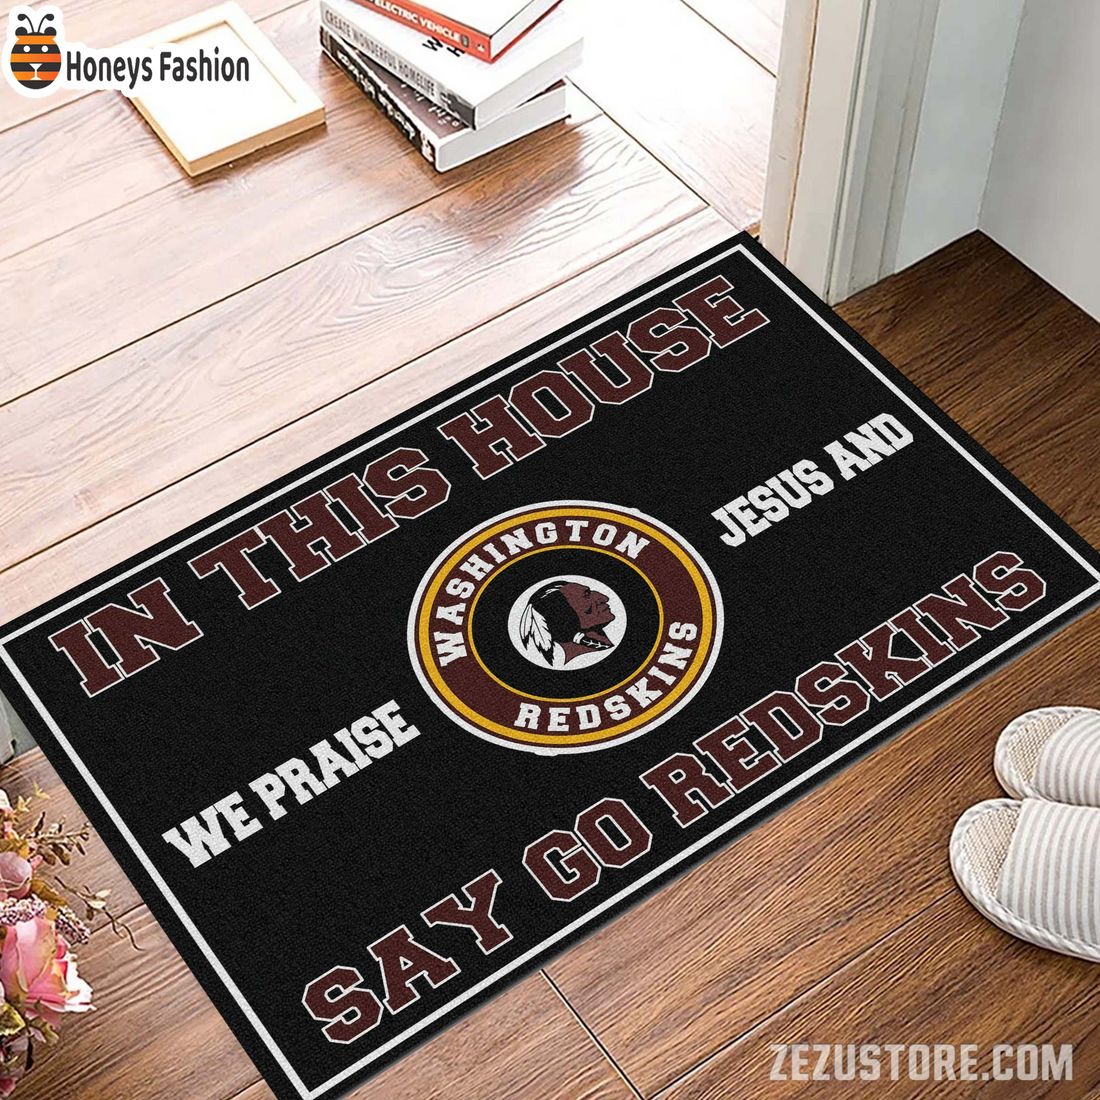 In this house we praise jesus and say go Redskins doormat